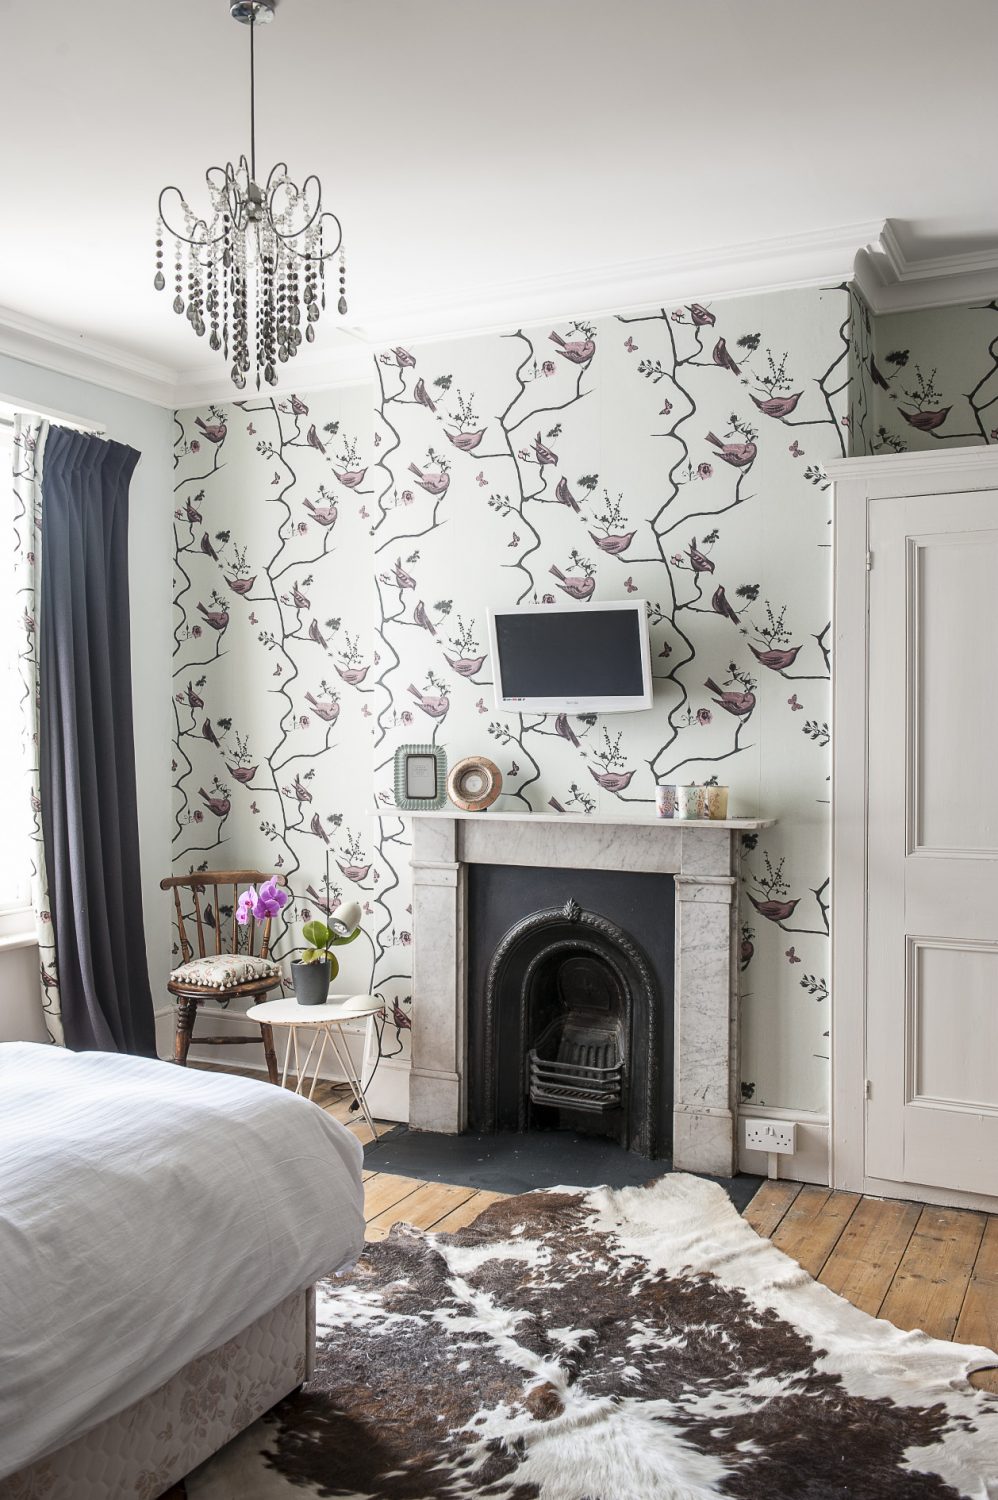 Annette’s daughter’s room is beautifully tidy. The treatment in this room is simple, but effective. The original fireplace is set off well in a wall covered with ‘Pavilion Birds’ wallpaper by St. Leonards designer Louise Body